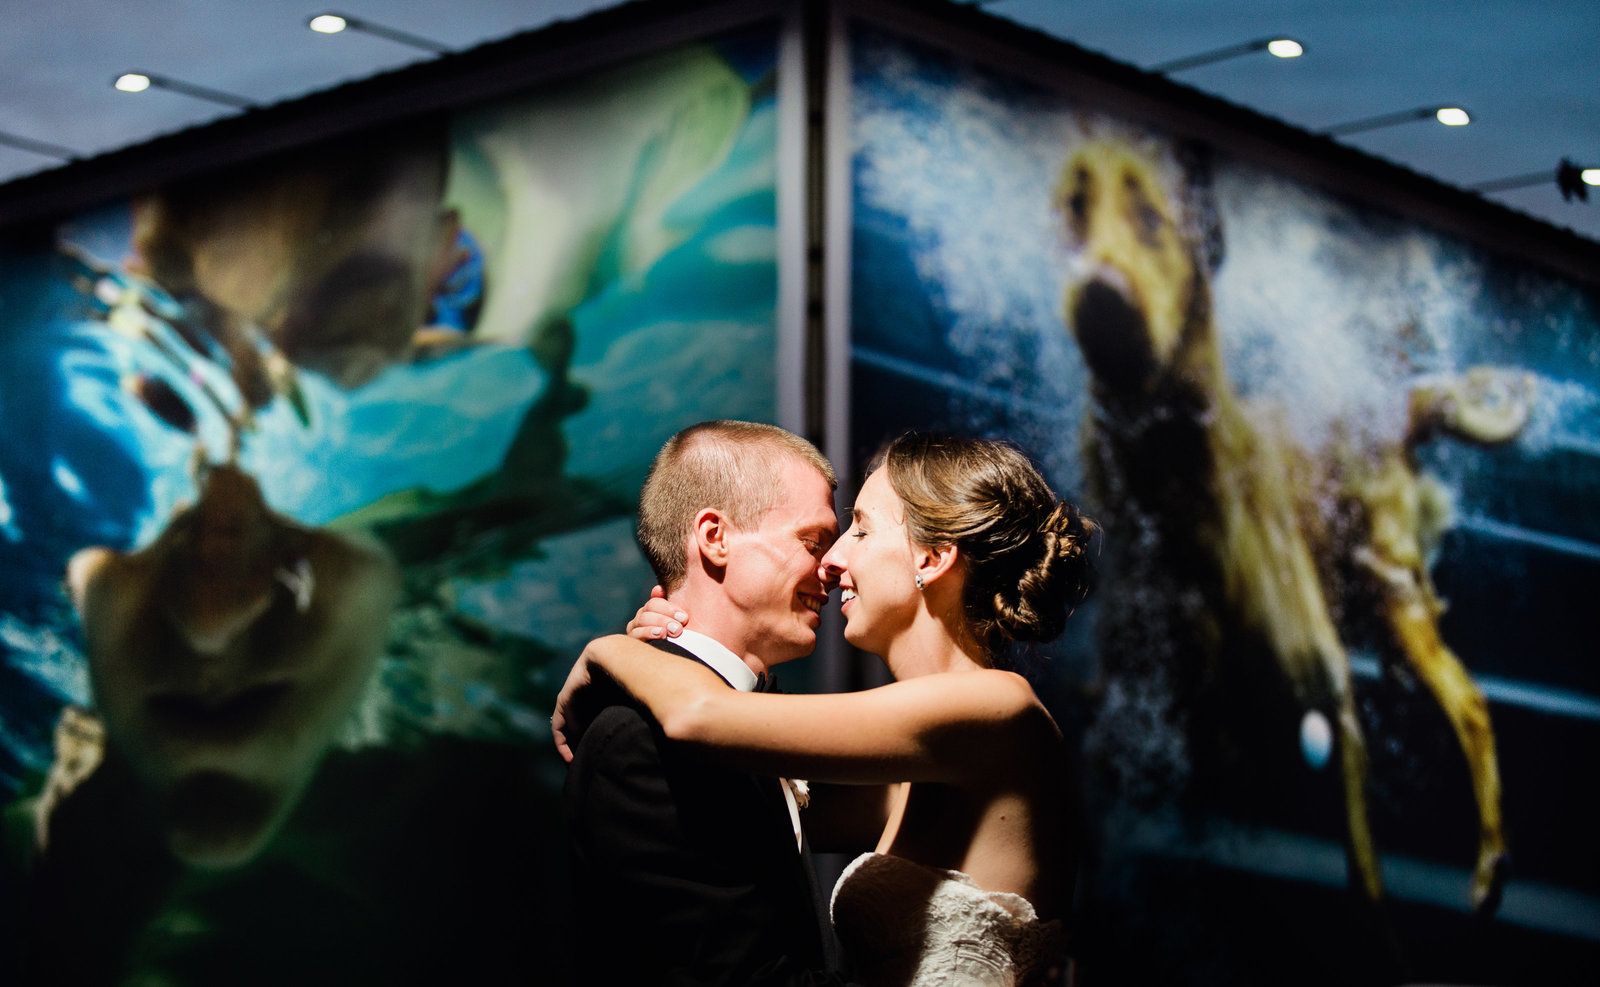 a downtown Columbus wedding photo taken at night of a couple in front of a colorful billboard with a dog and swimmer underwater